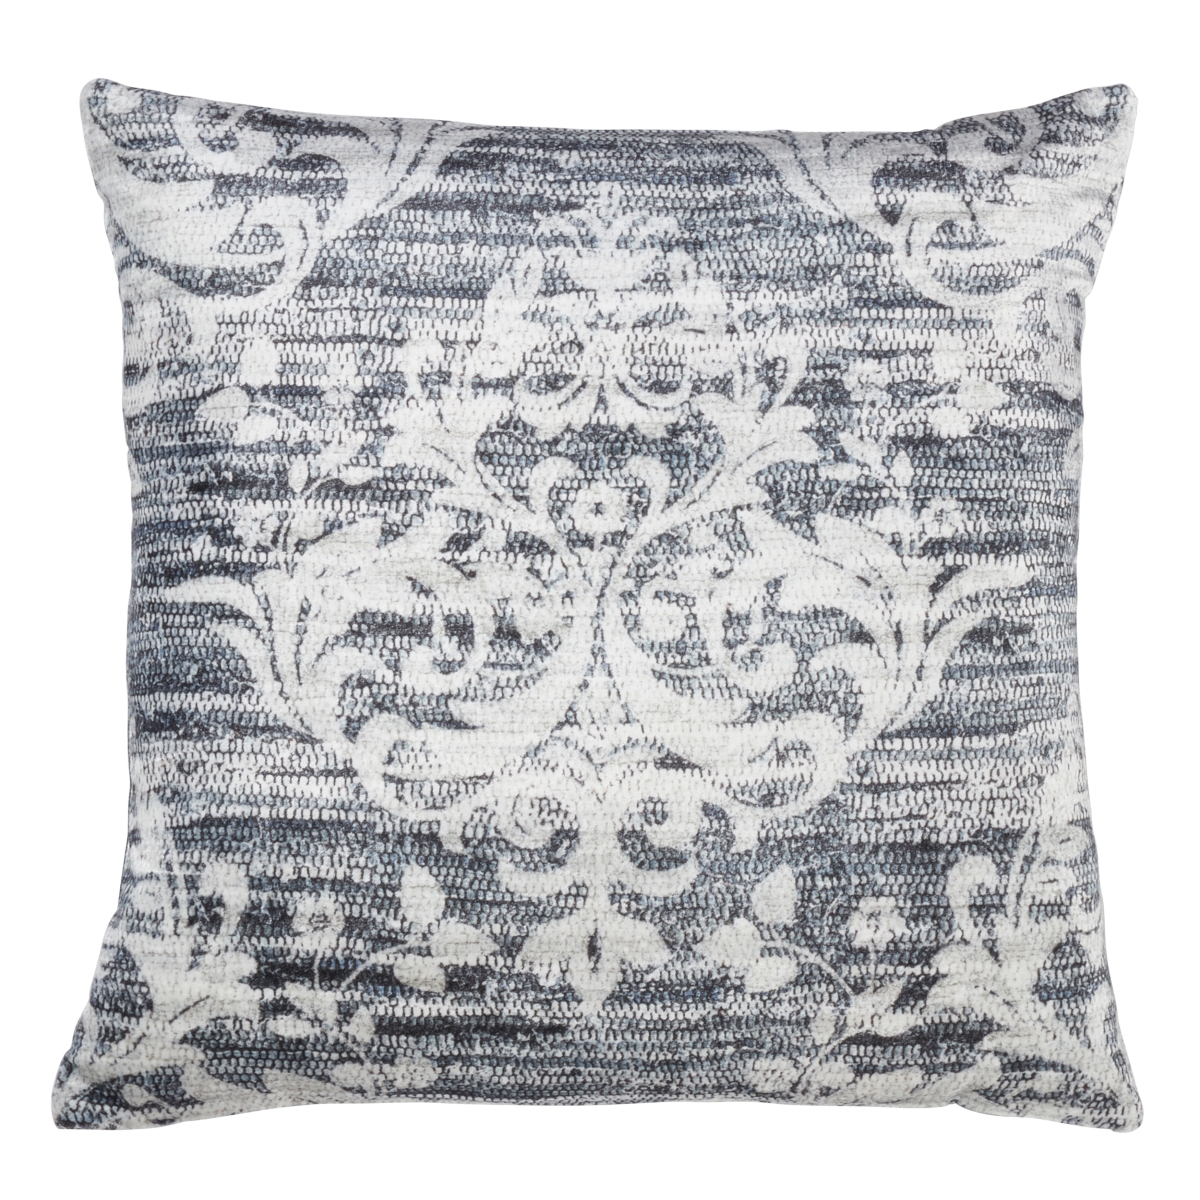 952.in20s 20 In. Square Down Filled Throw Pillow With Distressed Motif Design, Indigo